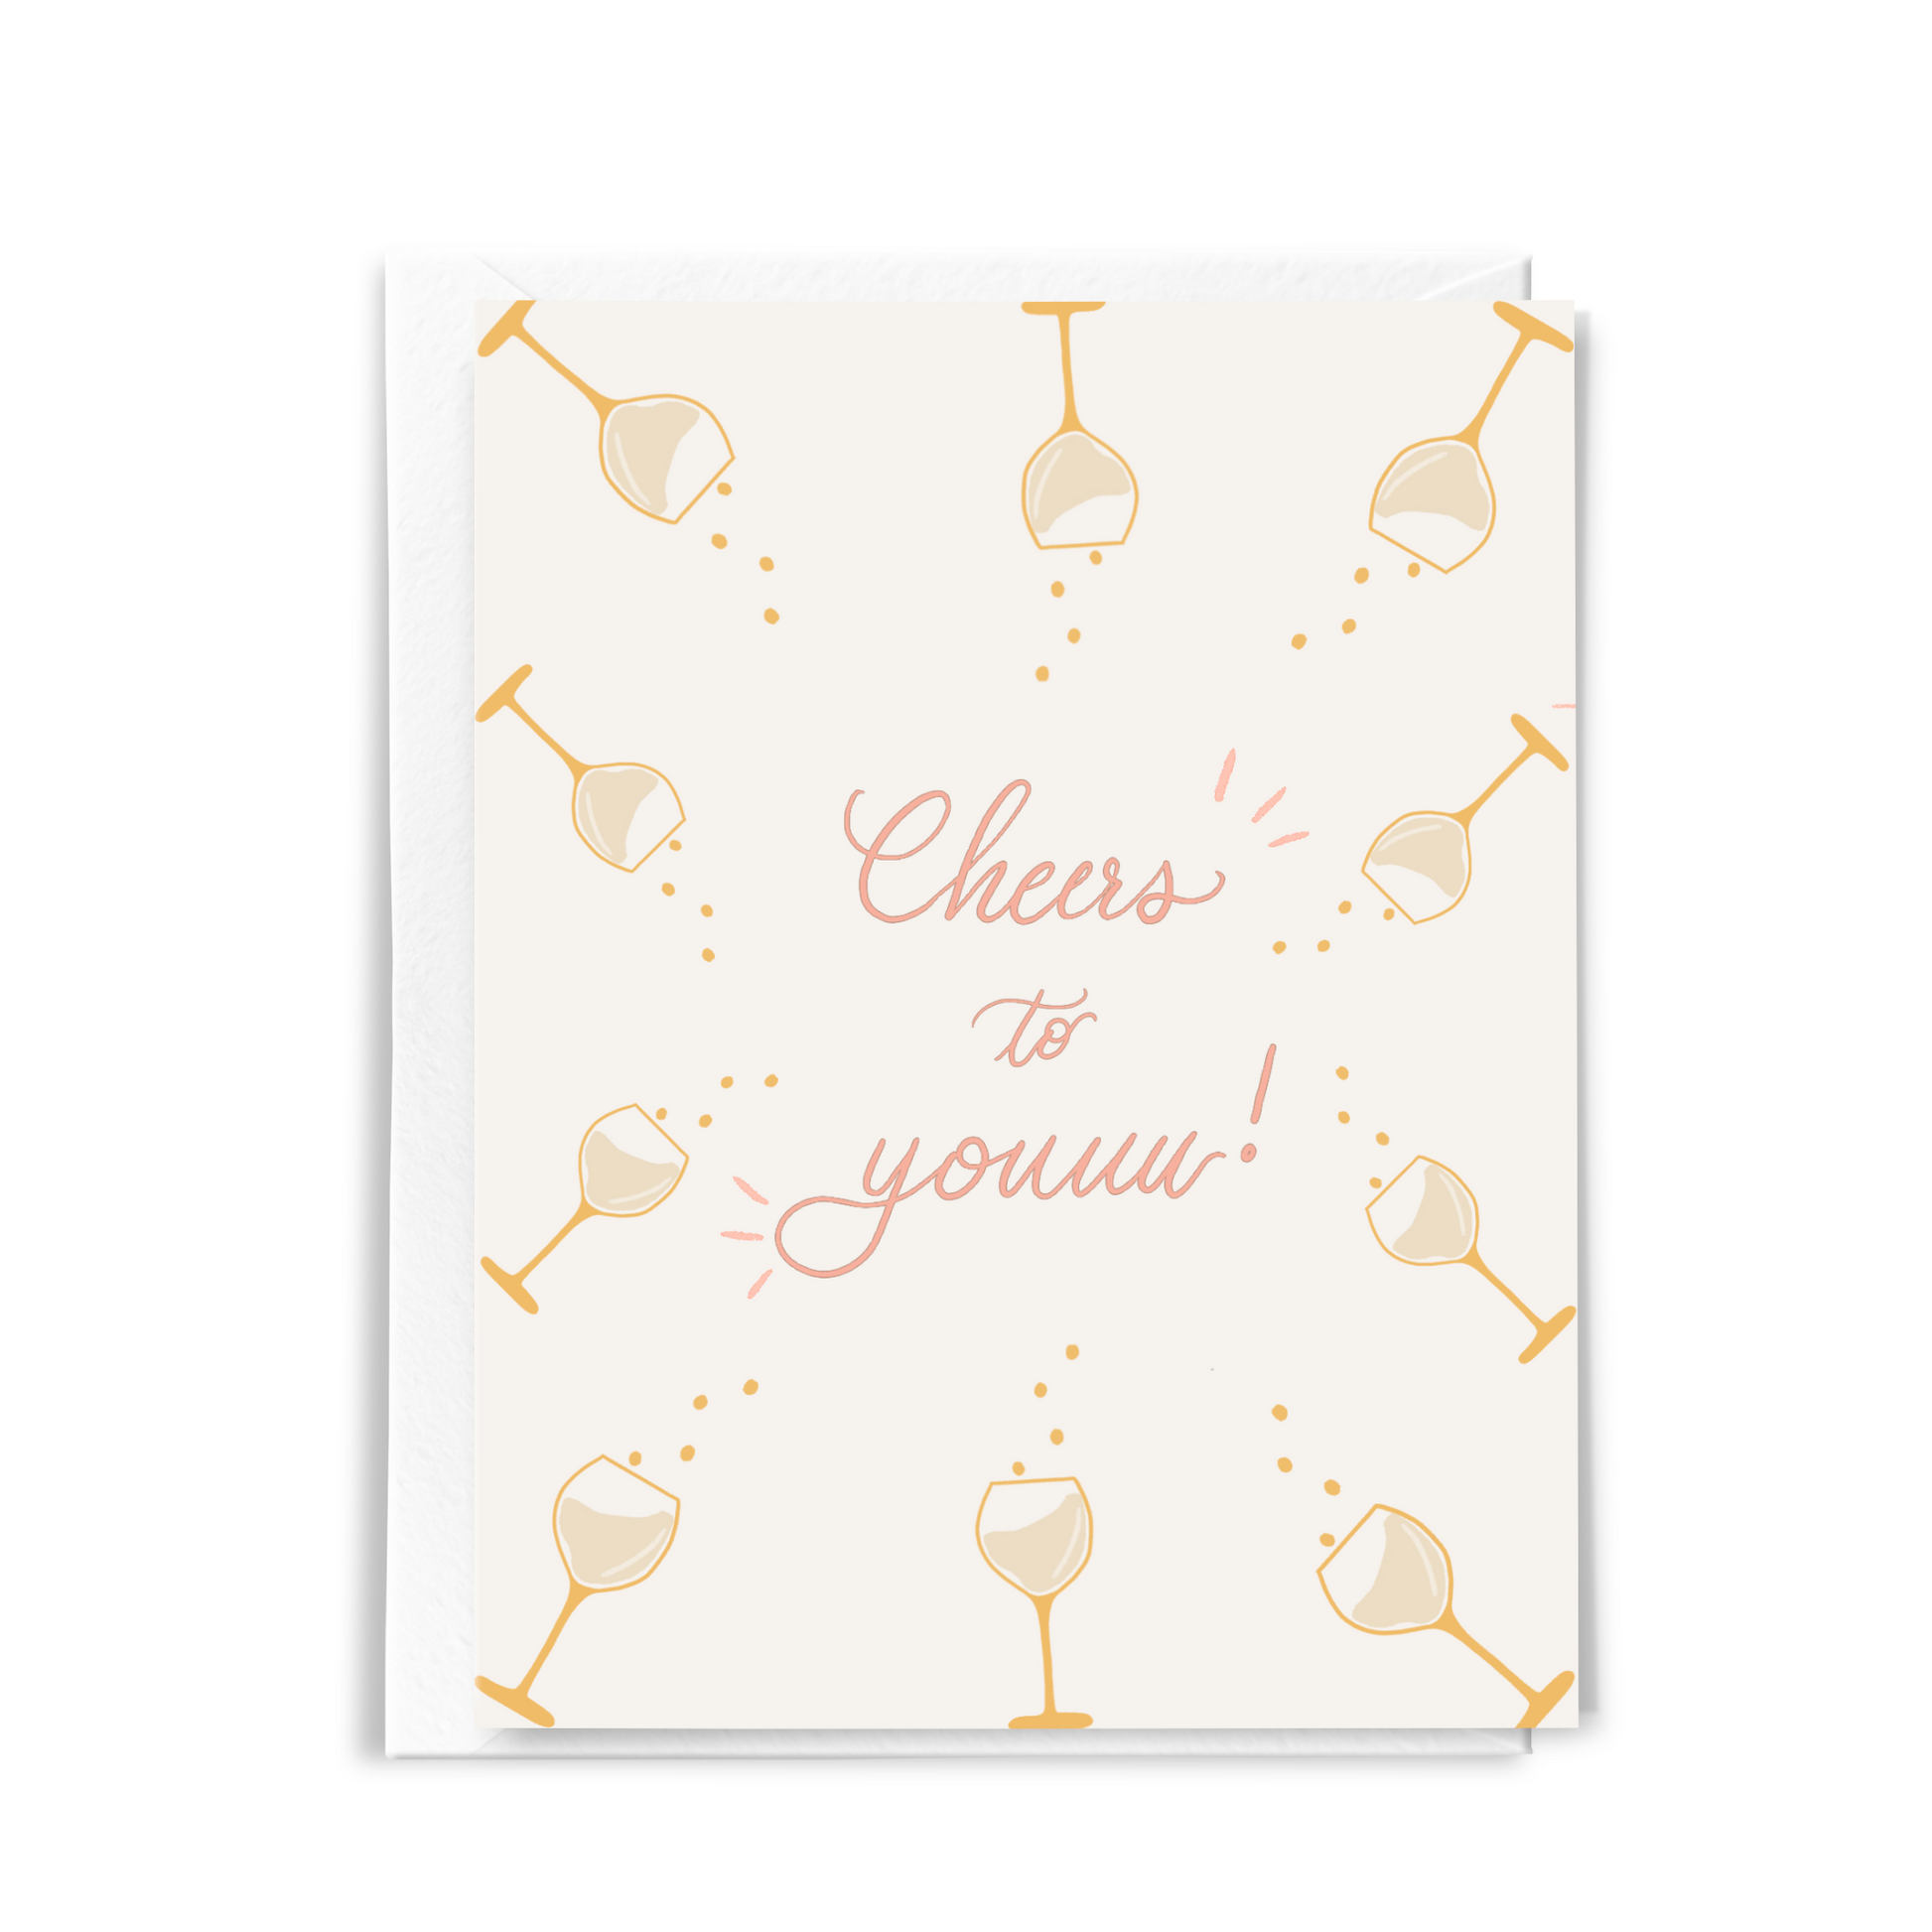 Cute Illustrated Congratulations Card with lettering